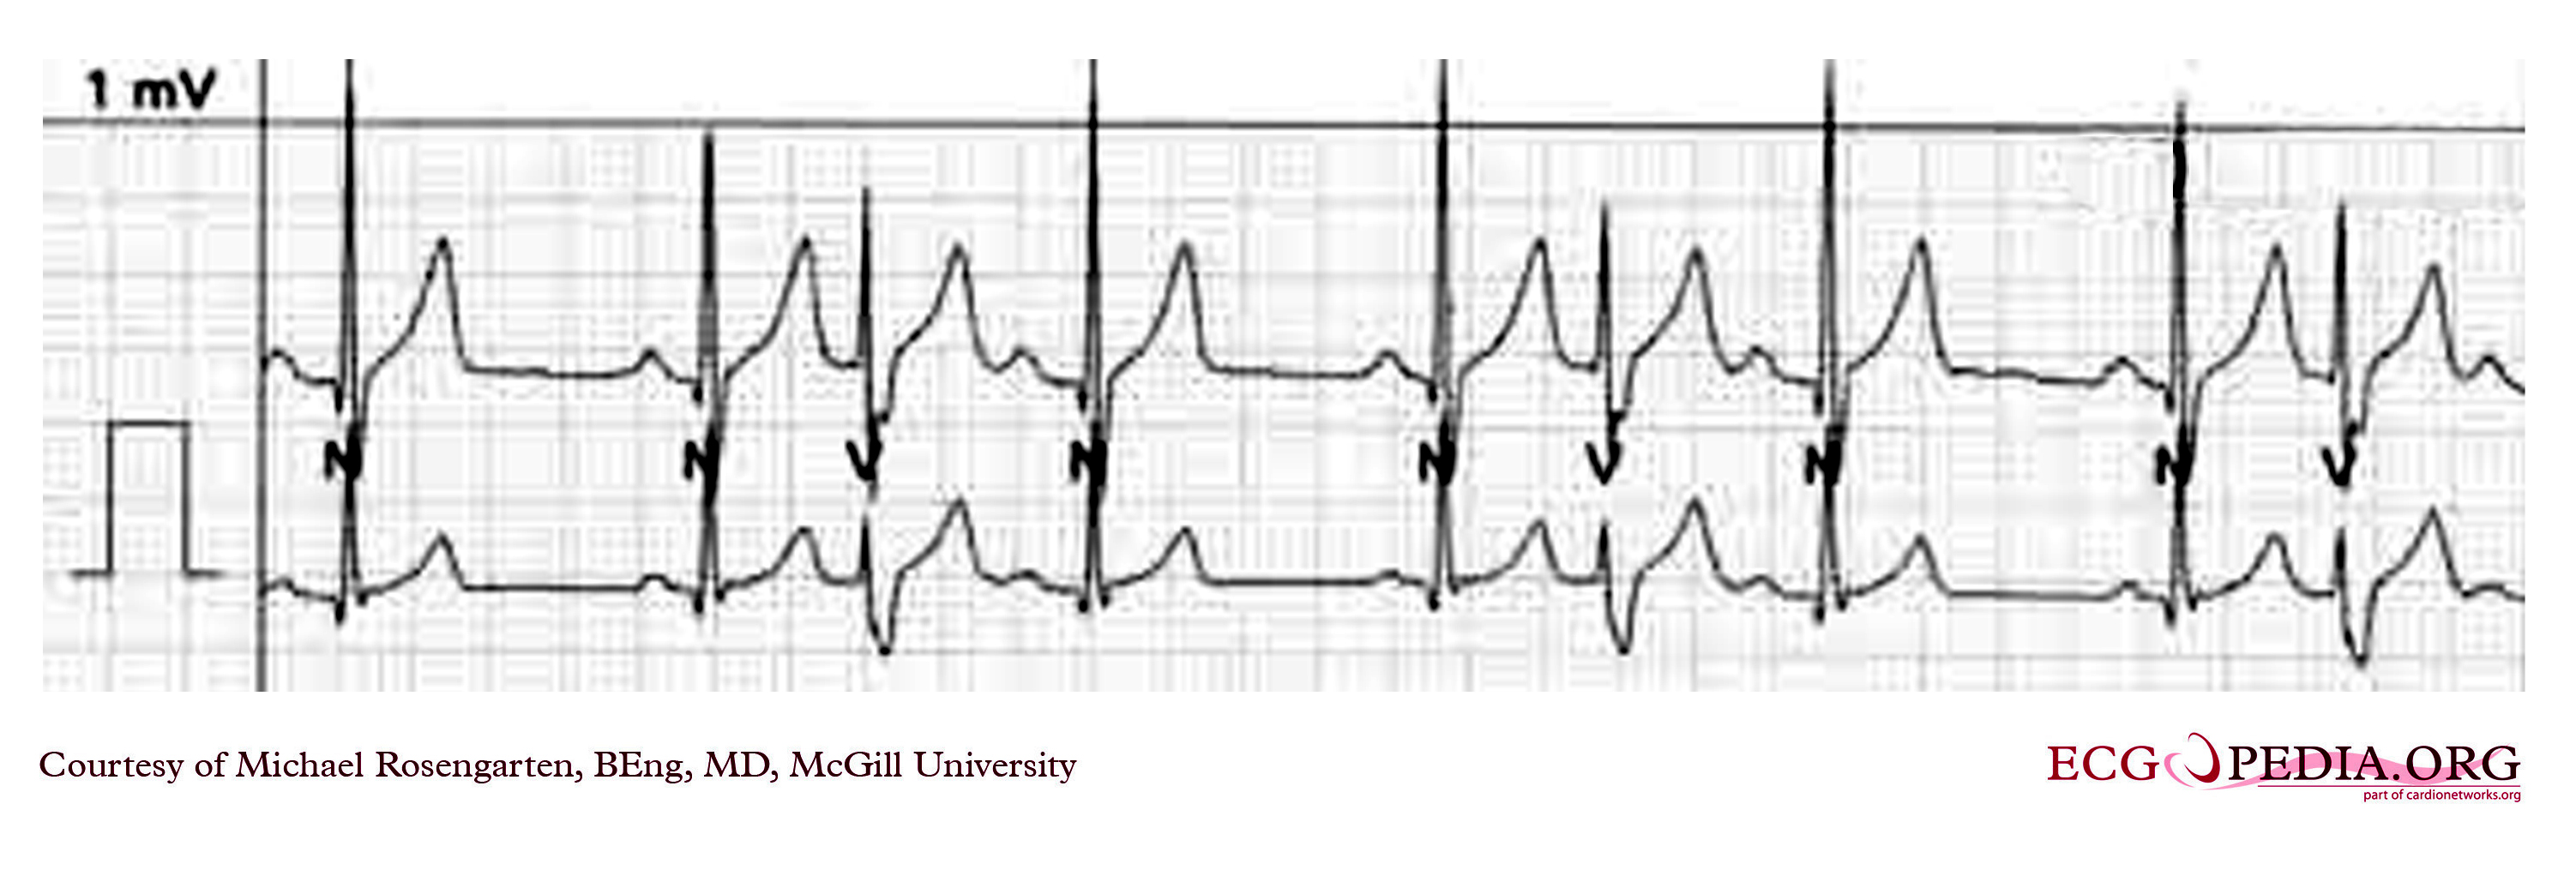 Premature Ventricular Contractions with trigeminal rhythm.jpg